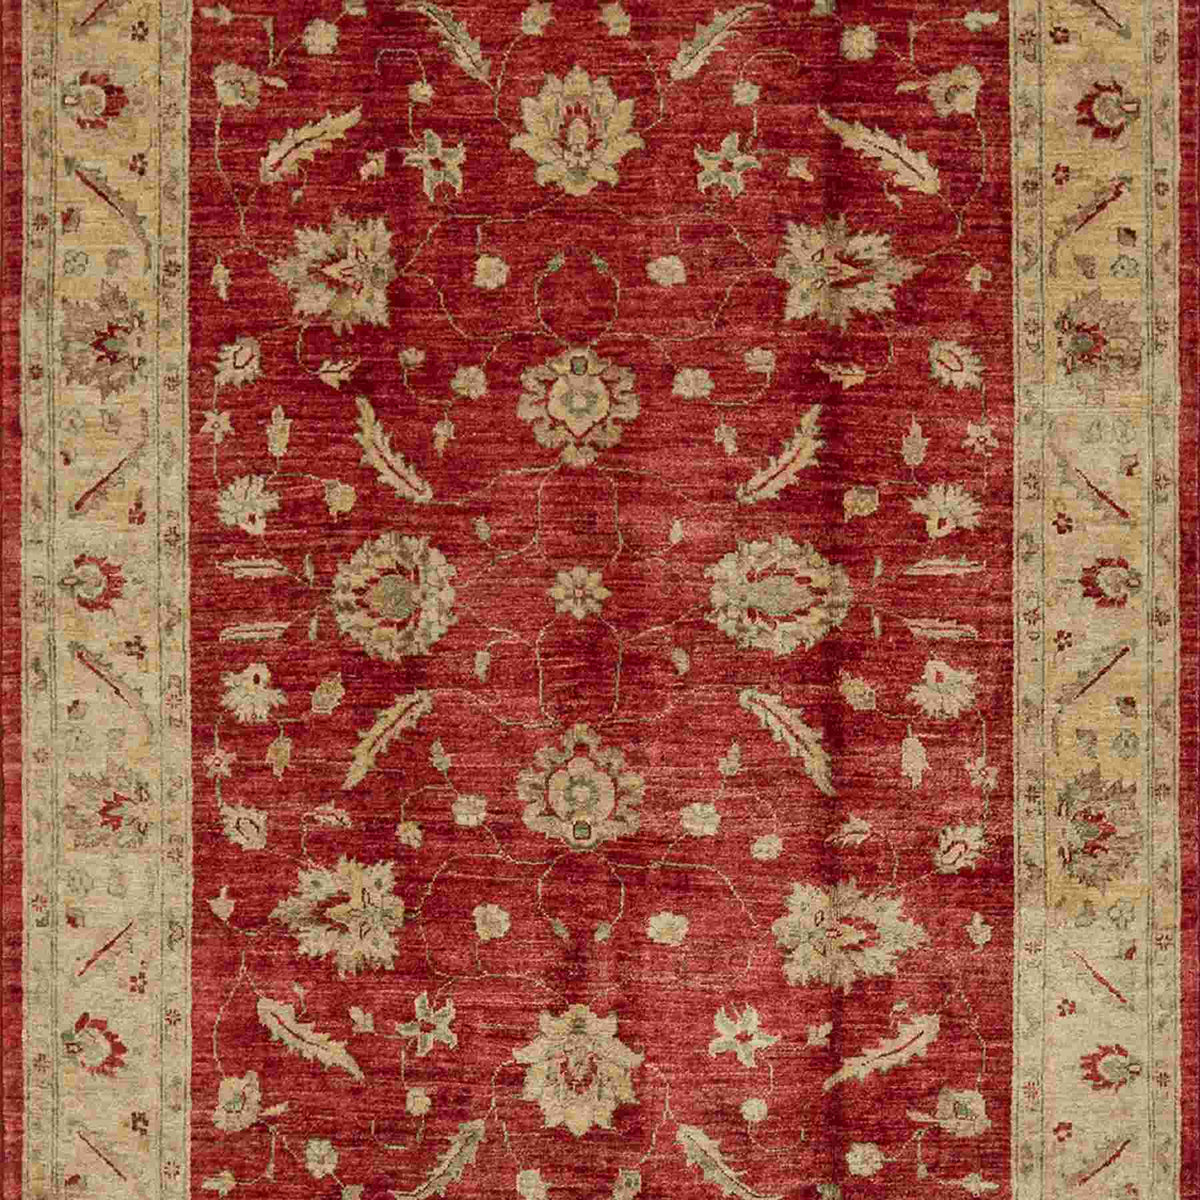 Fine Hand-knotted Wool Rug 152cm x 197cm